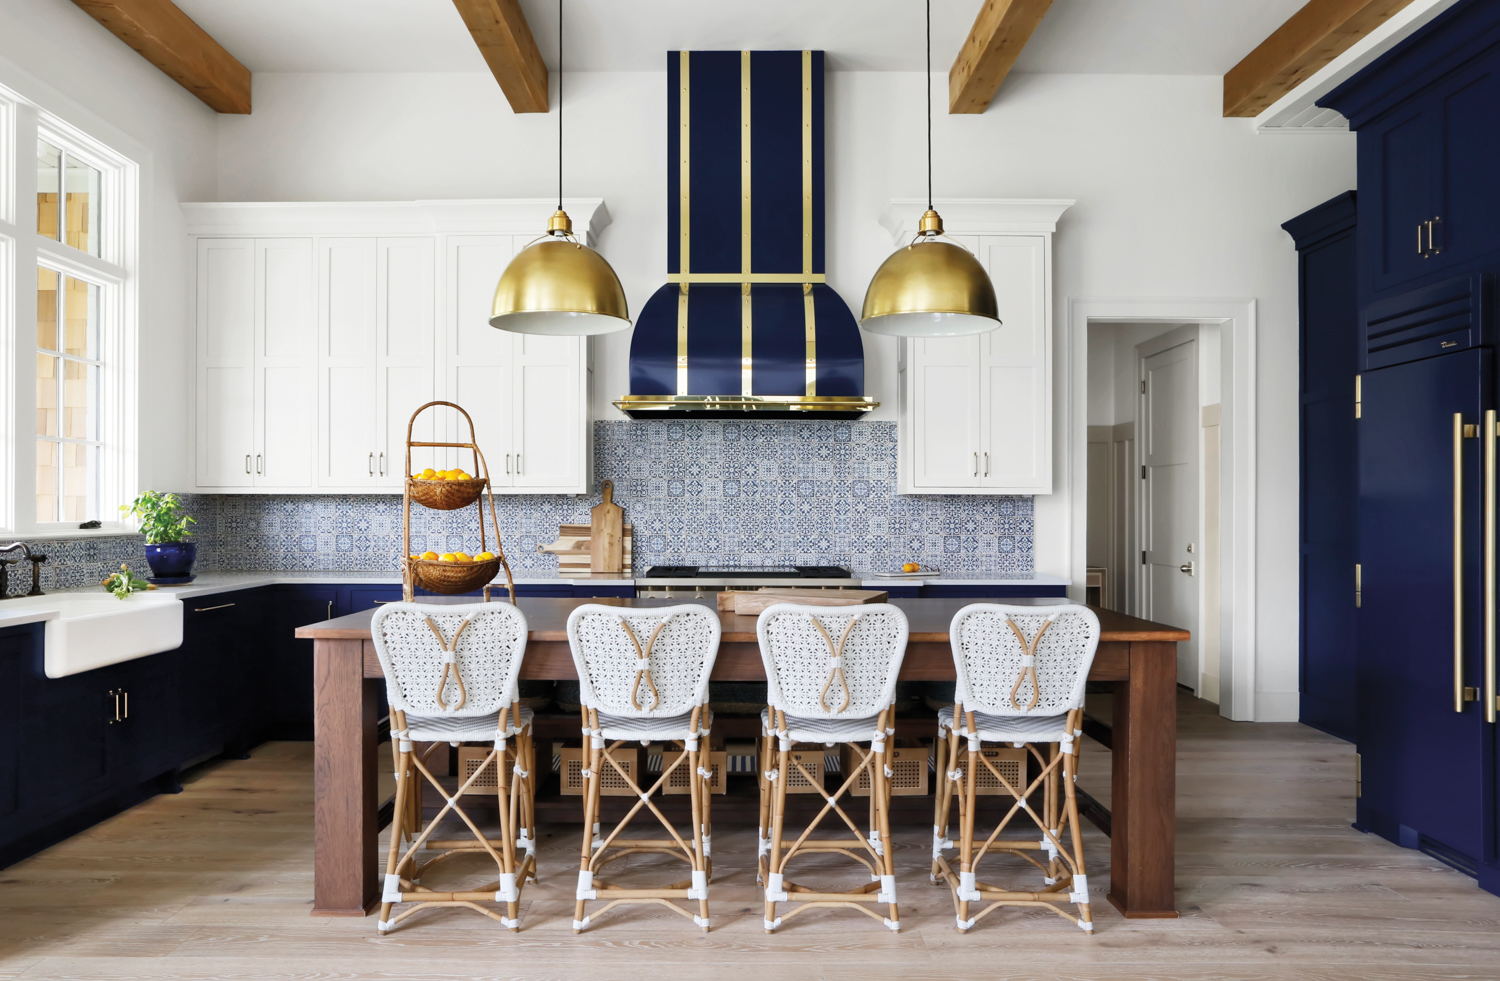 Kitchen with dark blue vent hood, patterned backsplash tile and French-inspired counter stools